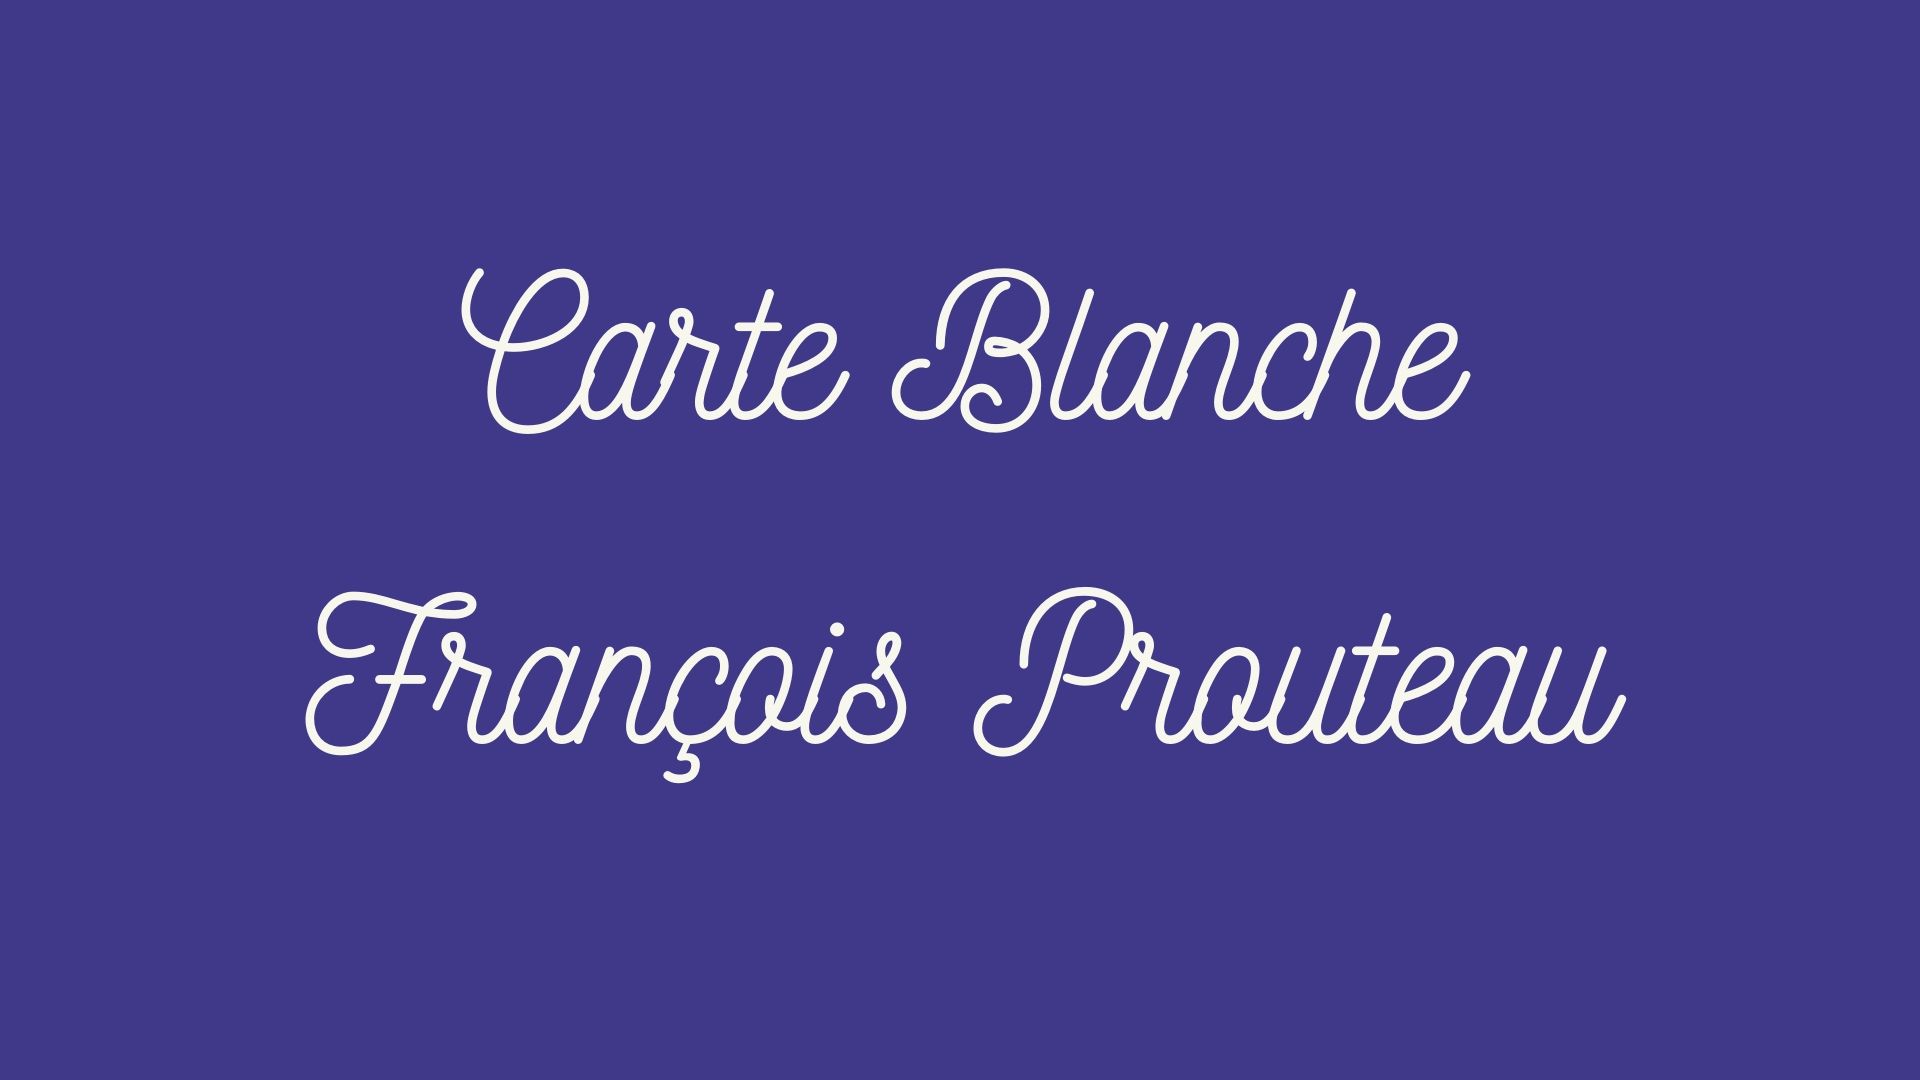 You are currently viewing François Prouteau’s last “Carte Blanche”.